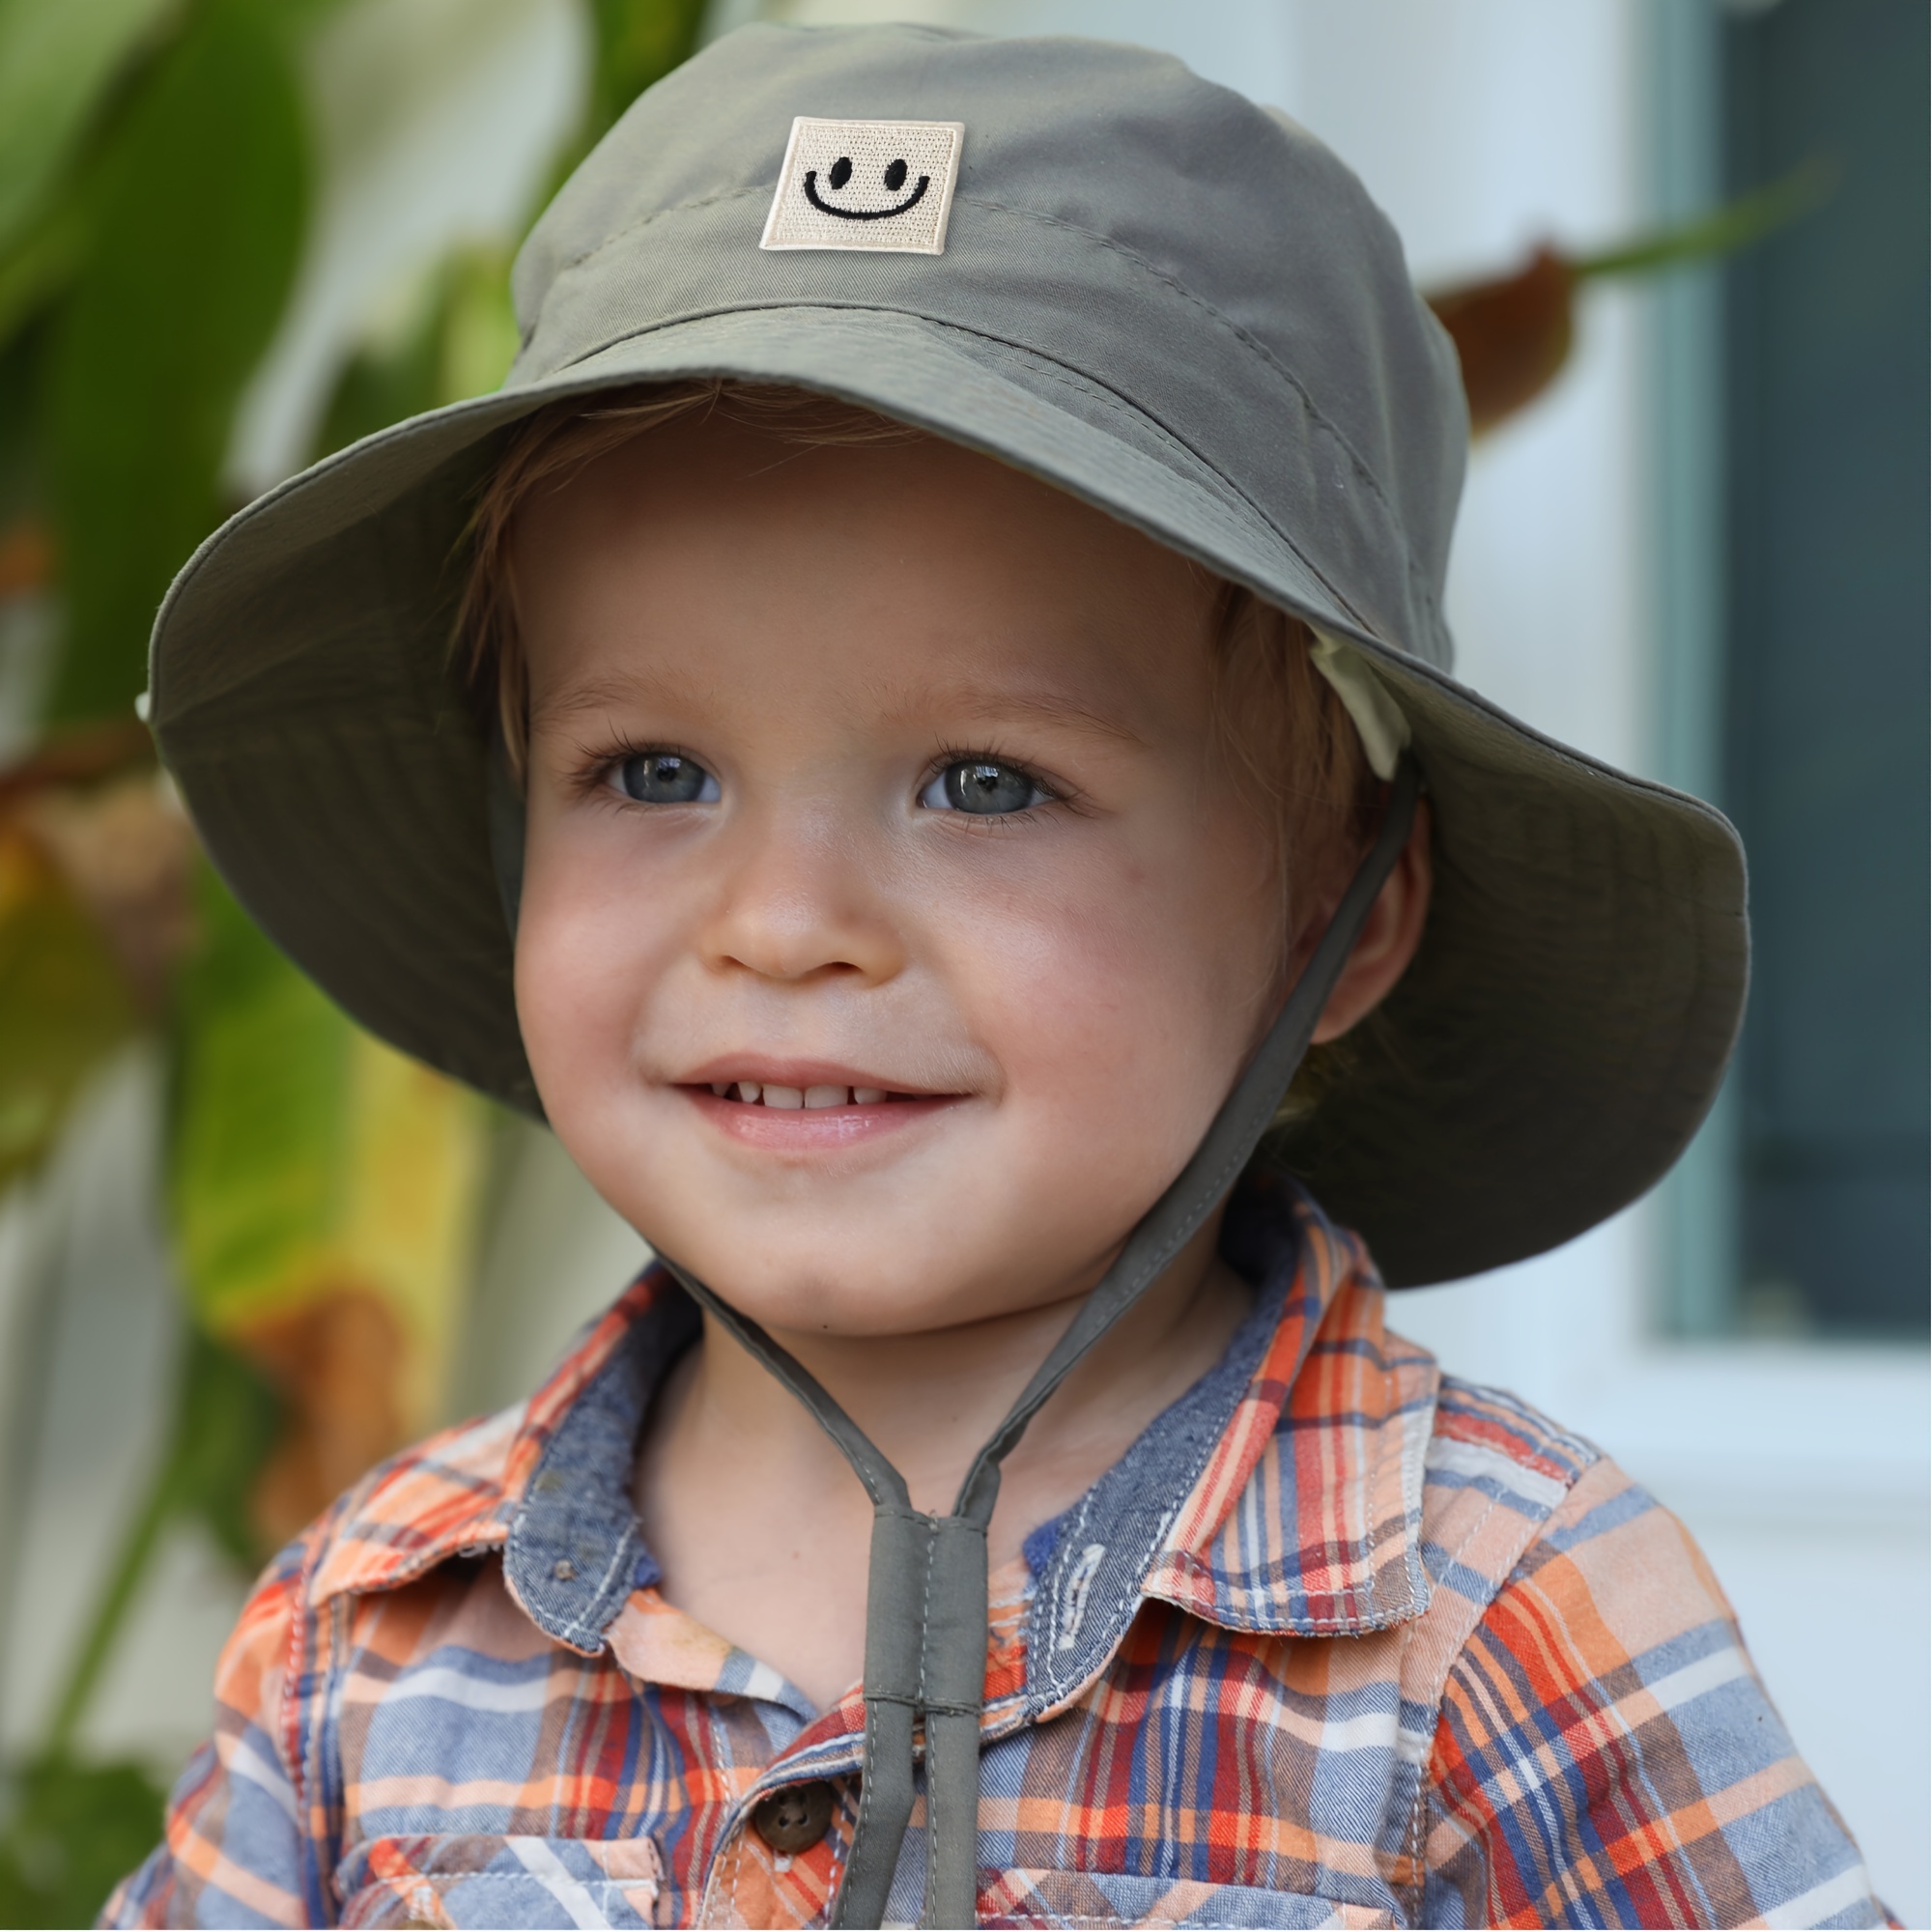 Unisex Baby Sun Hat with UPF 50+ Outdoor Adjustable Beach Hat,Baby Girl  Wide Brim Bucket Hats for Infant Toddler Little Boy